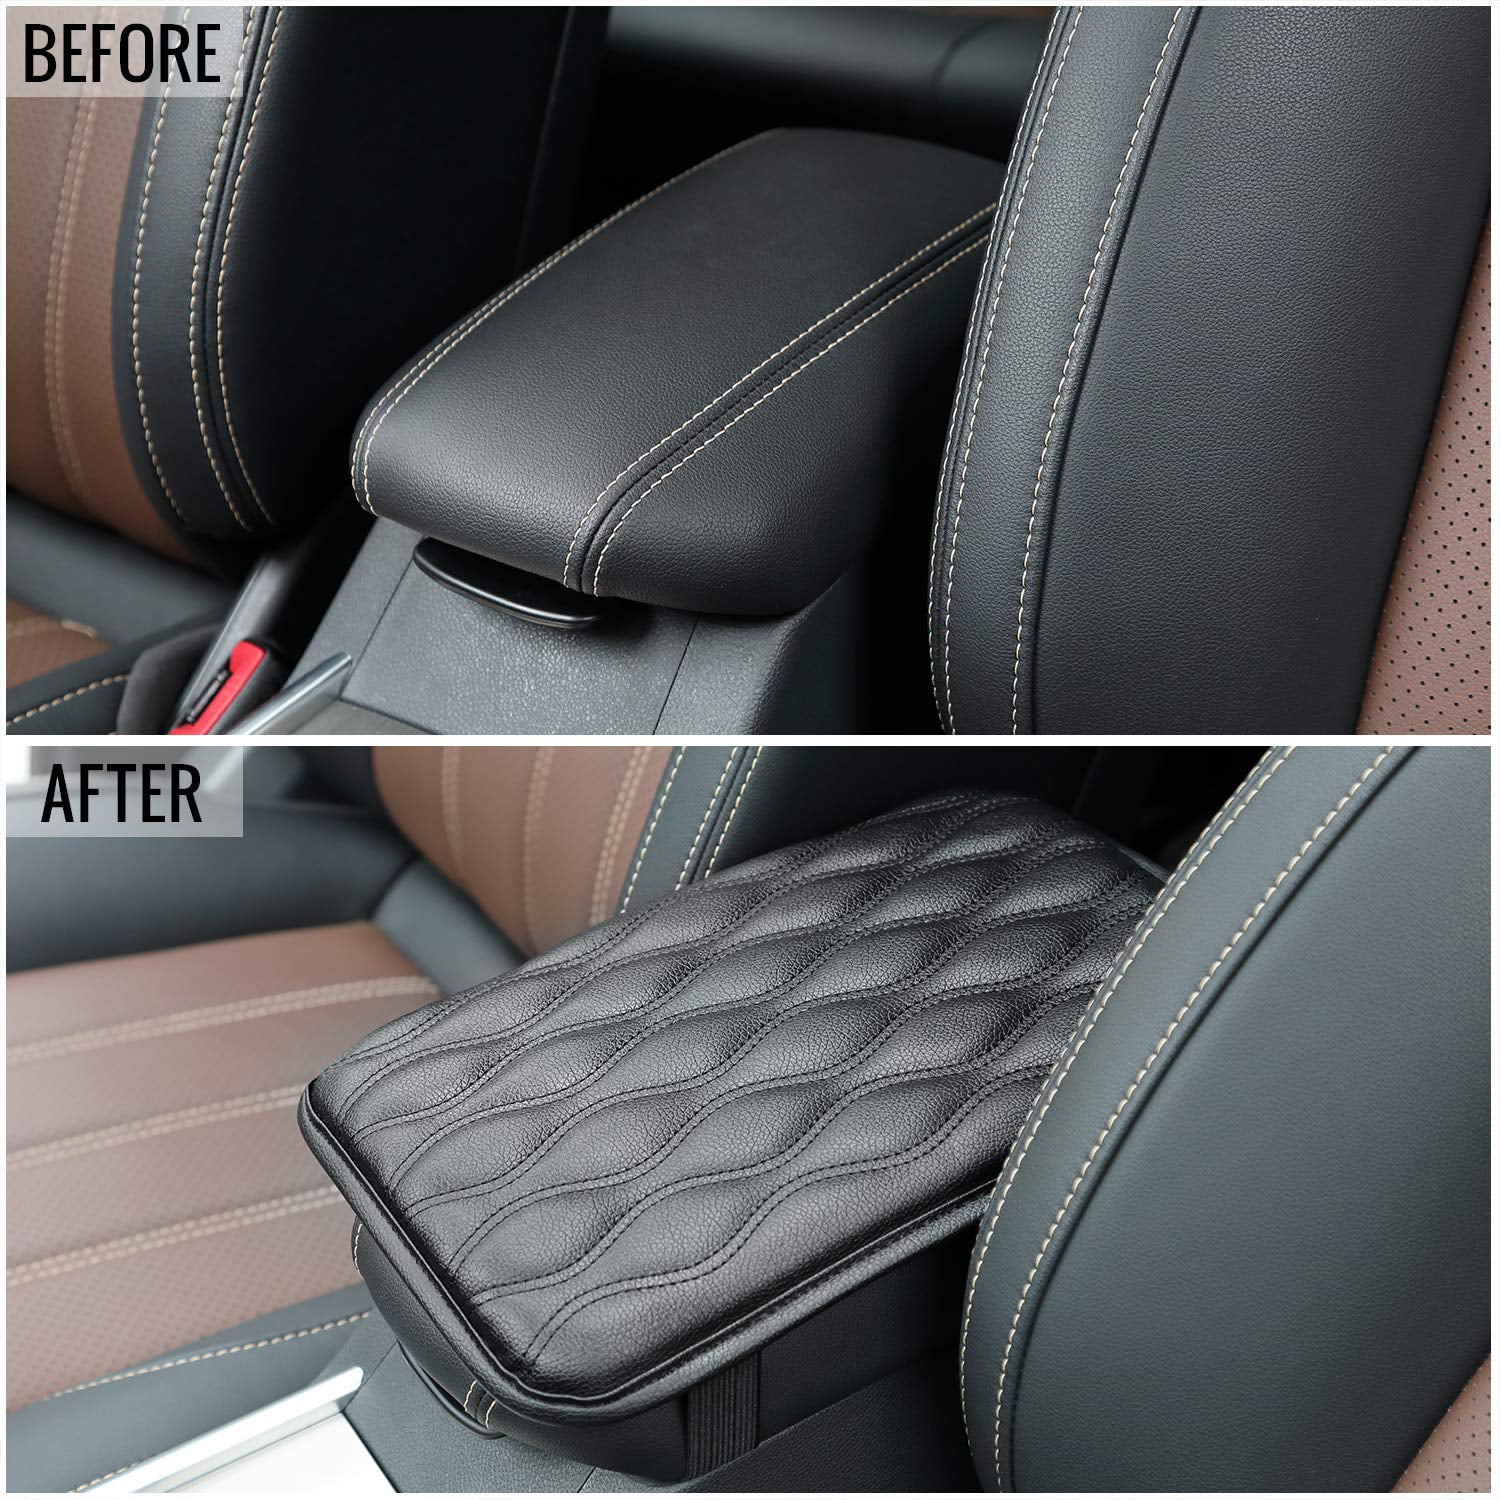 LEIWOOR 12.6x8.66 Bling Car Center Console Cover Car Armrest Cover Auto Arm Rest Cushion Pads Center Console Armrest Protector Universal Fit Diamond Car Decor Accessories for Women Black 